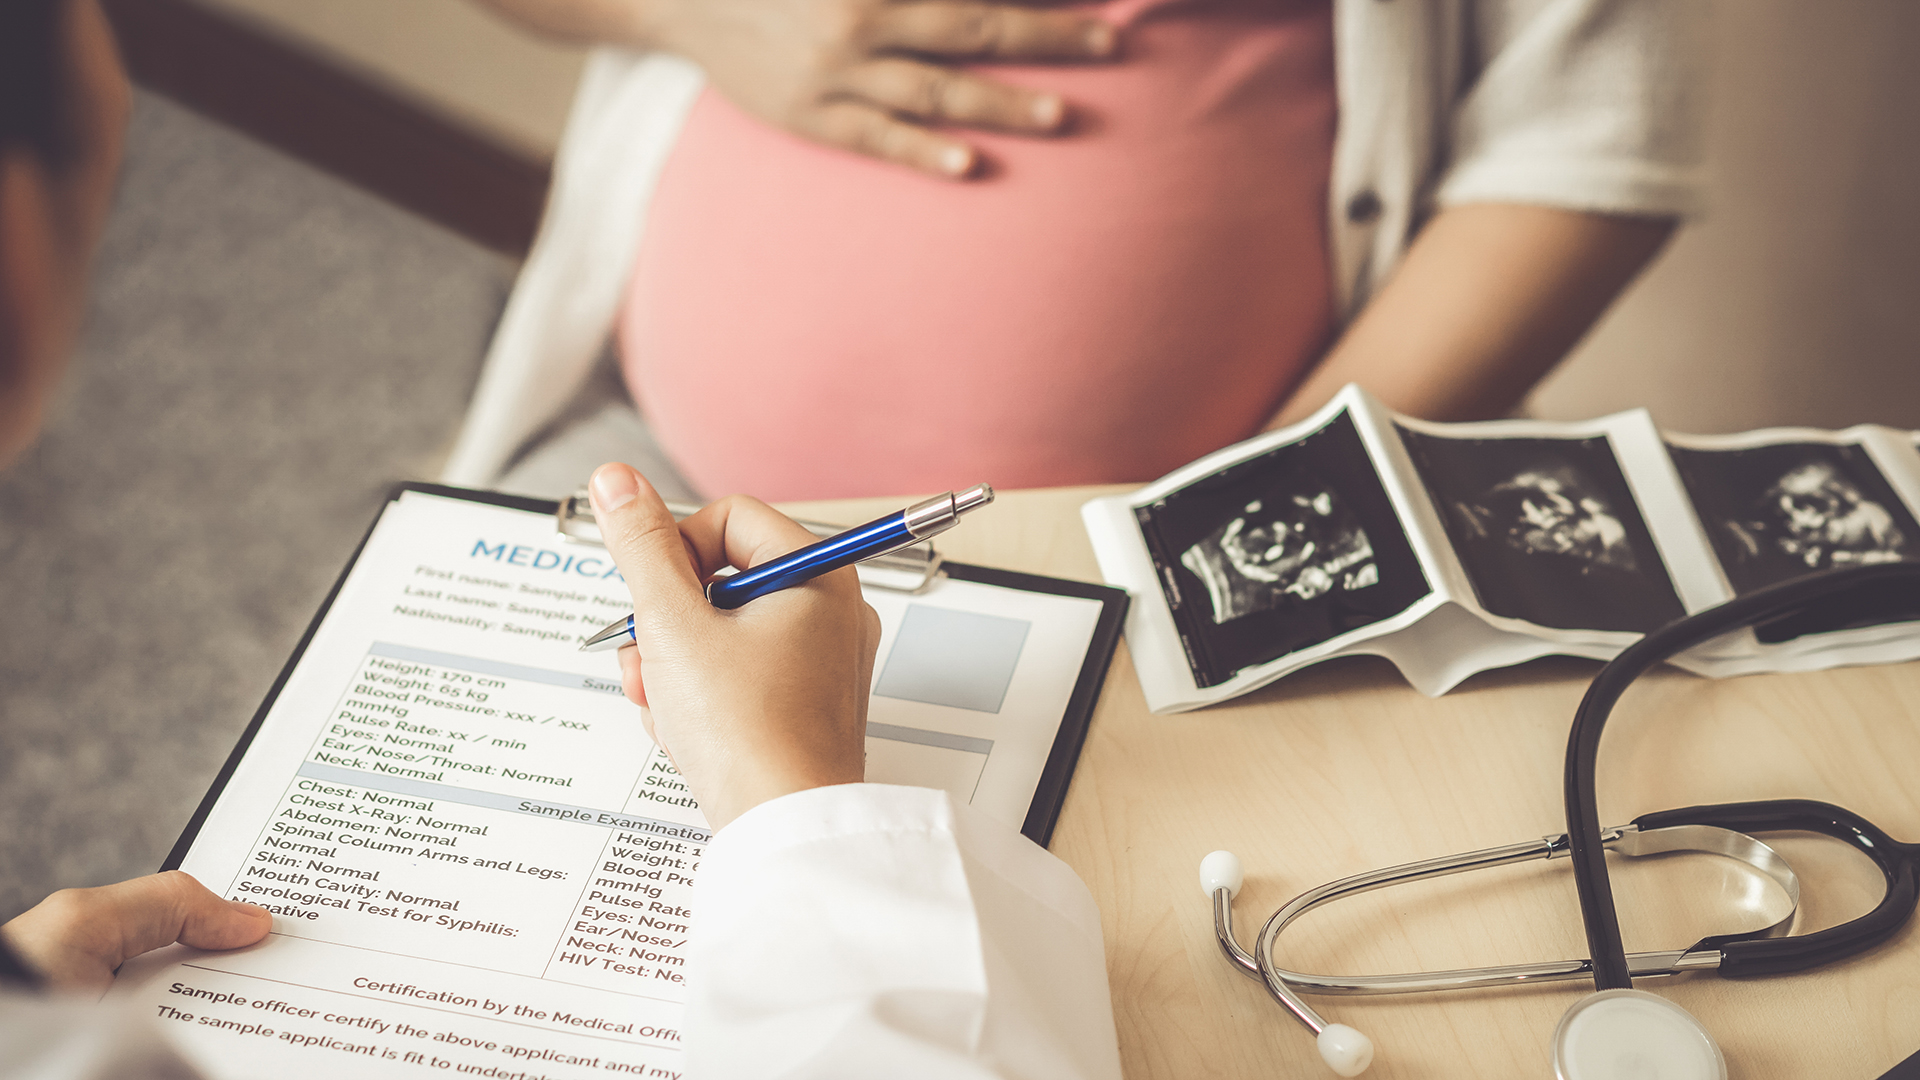 Pregnancy complications can lead to heart disease in later life